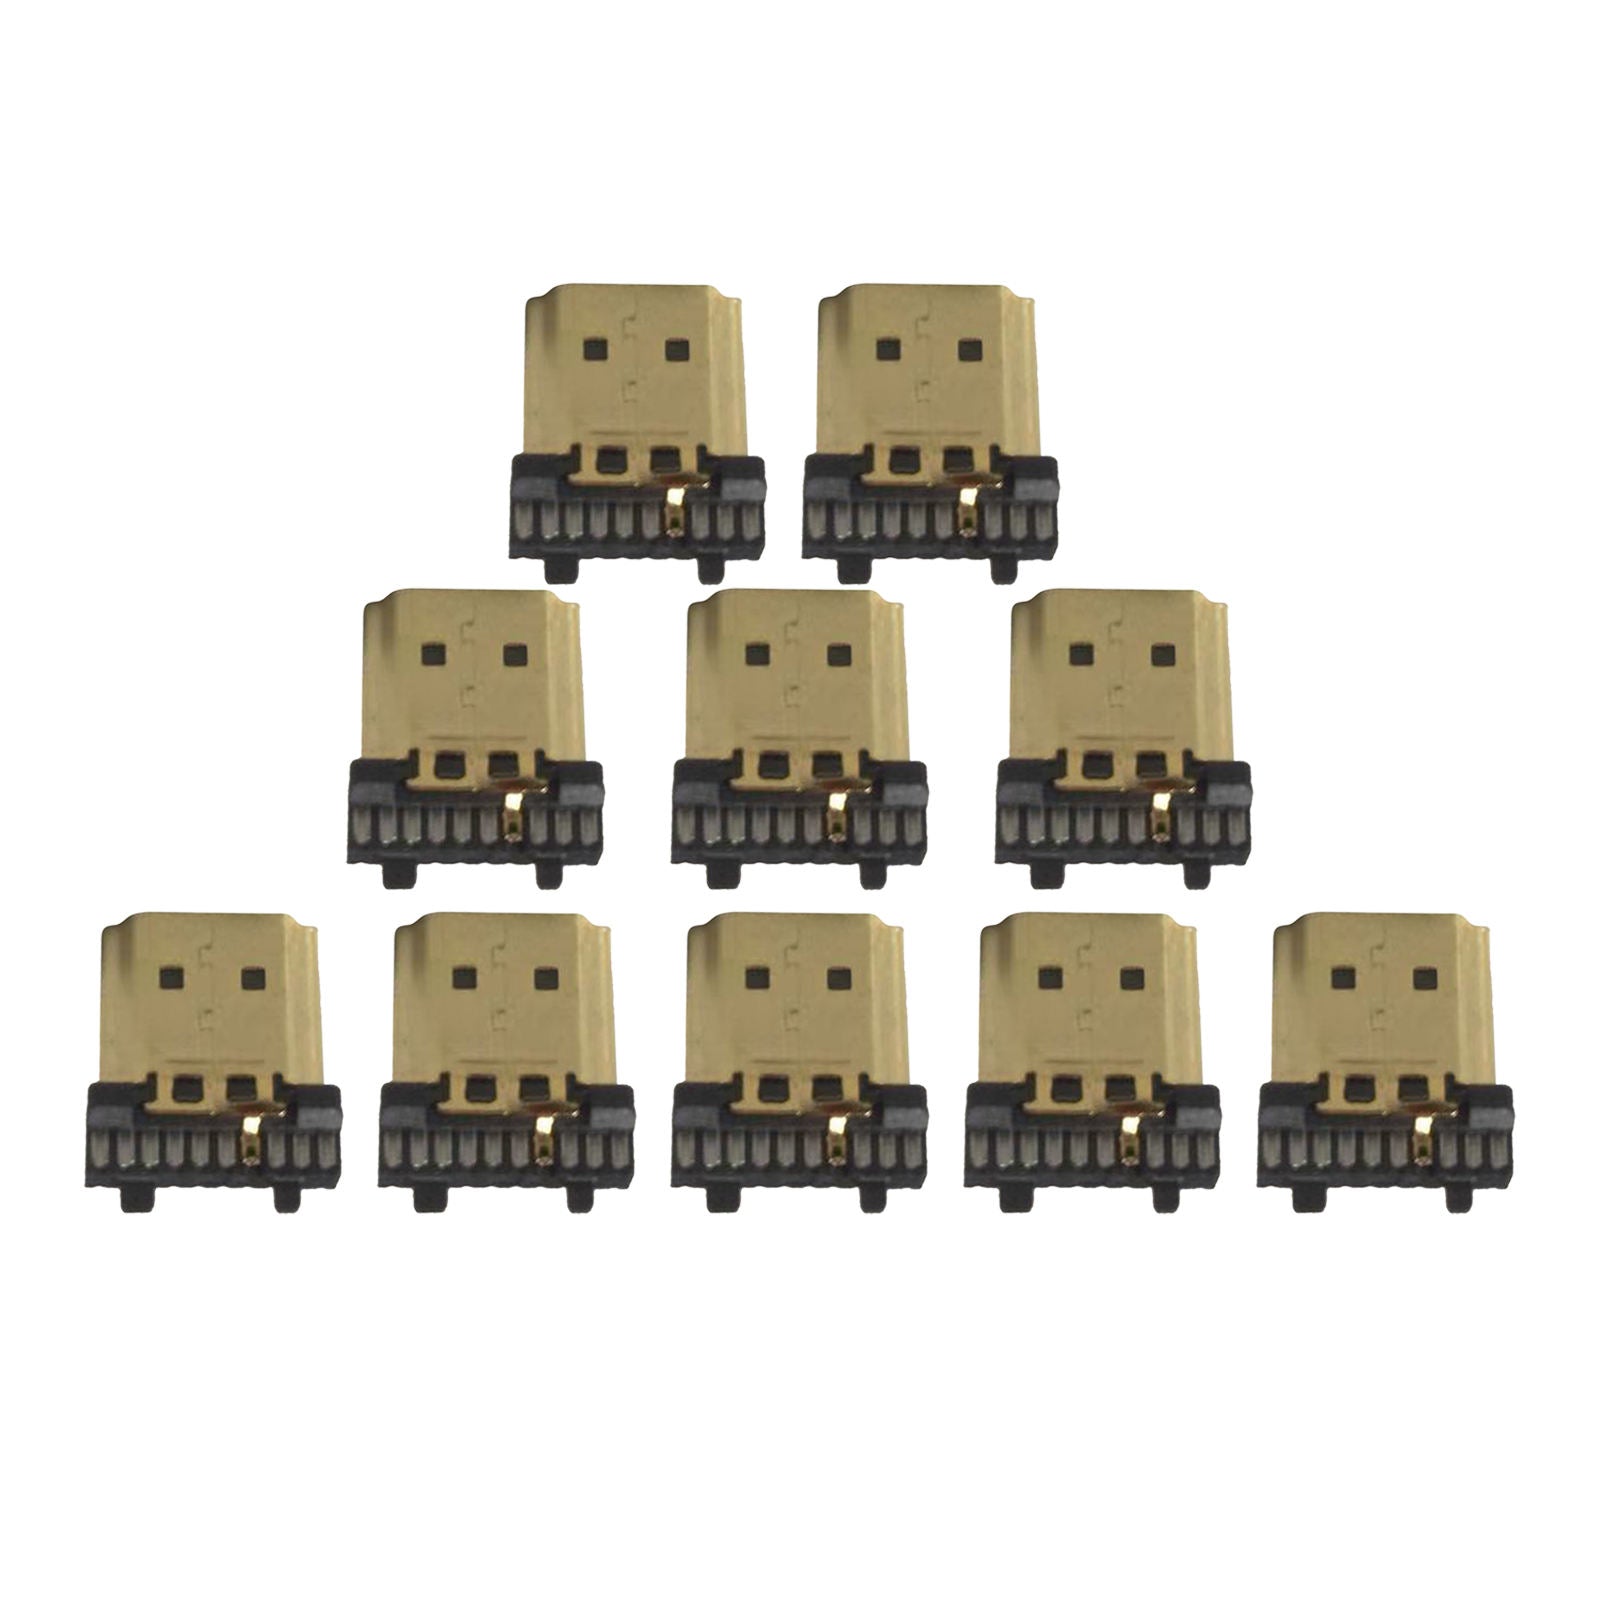 10 Pieces HDMI Male 19Pin Connectors Jack Termination Replacement Kit